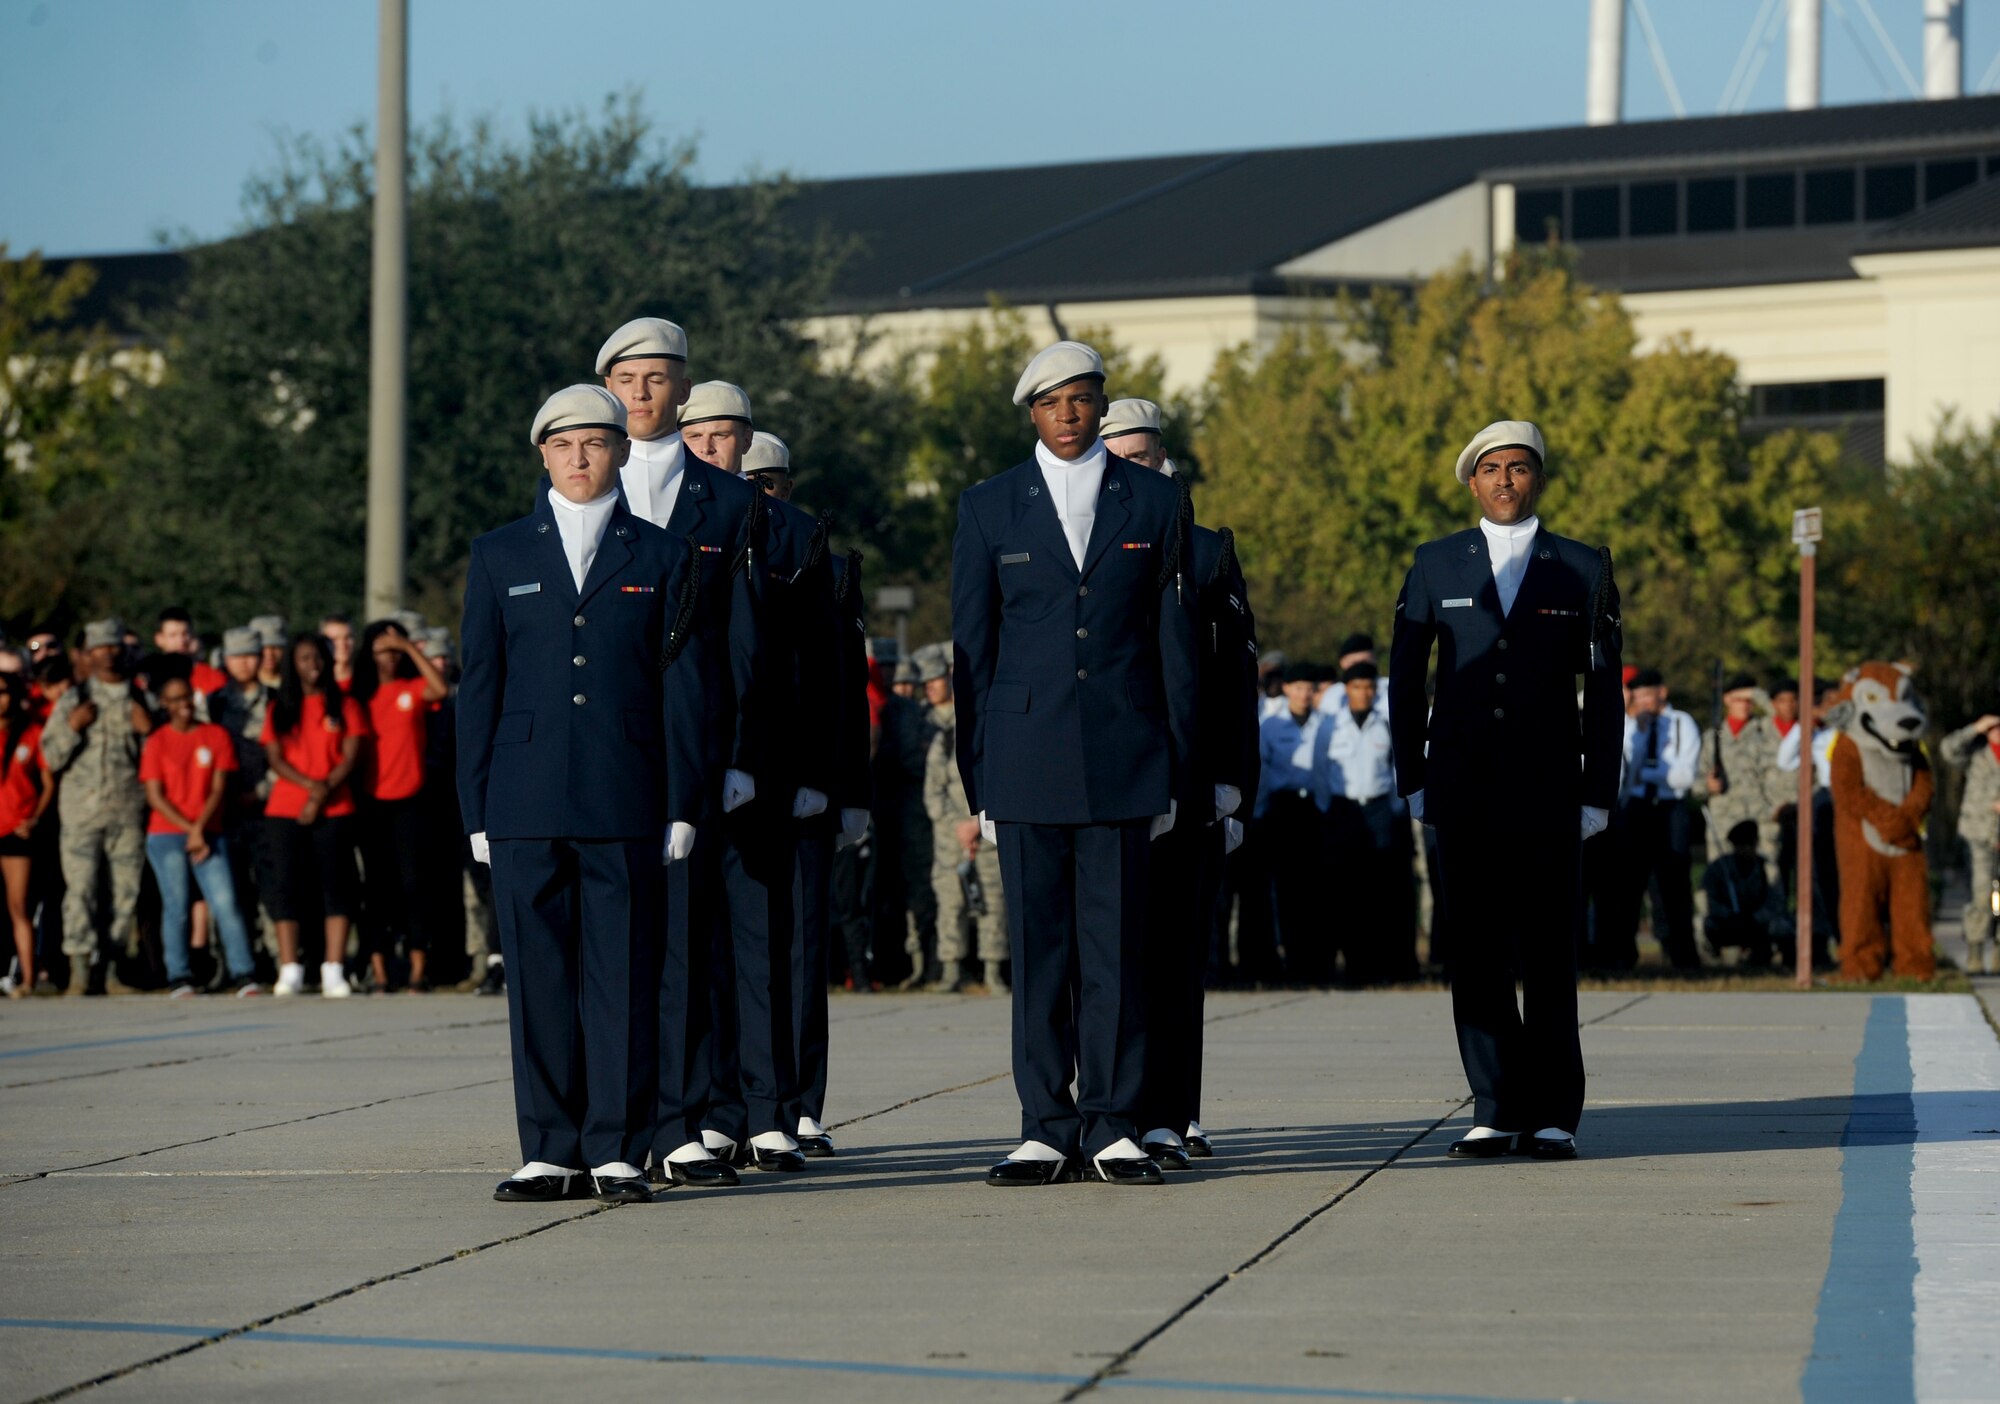 Members of the 334th Training Squadron regulation drill team perform during the 81st Training Group drill down at the Levitow Training Support Facility drill pad Nov. 4, 2016, on Keesler Air Force Base, Miss. The quarterly drill down featured an open ranks inspection, regulation drill routine and freestyle drill routine categories. The 81st TRG’s four non-prior service training squadrons competed in the competition, with the 334th TRS “Gators” taking home the overall first place. (U.S. Air Force photo by Kemberly Groue/Released)